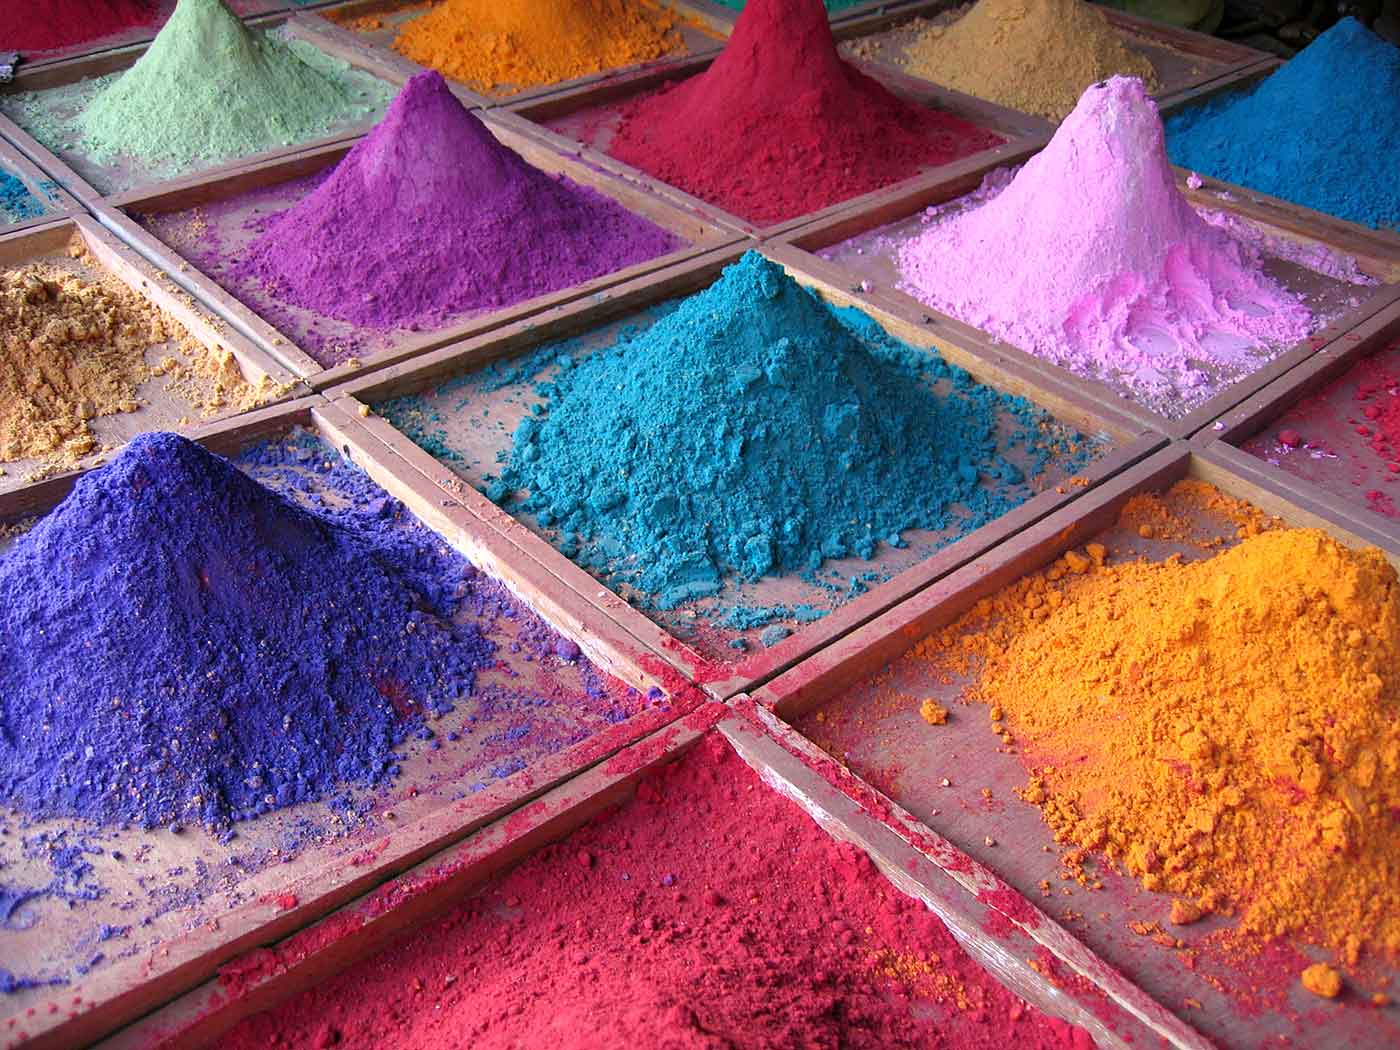 Pigments for sale in market in Goa, India.